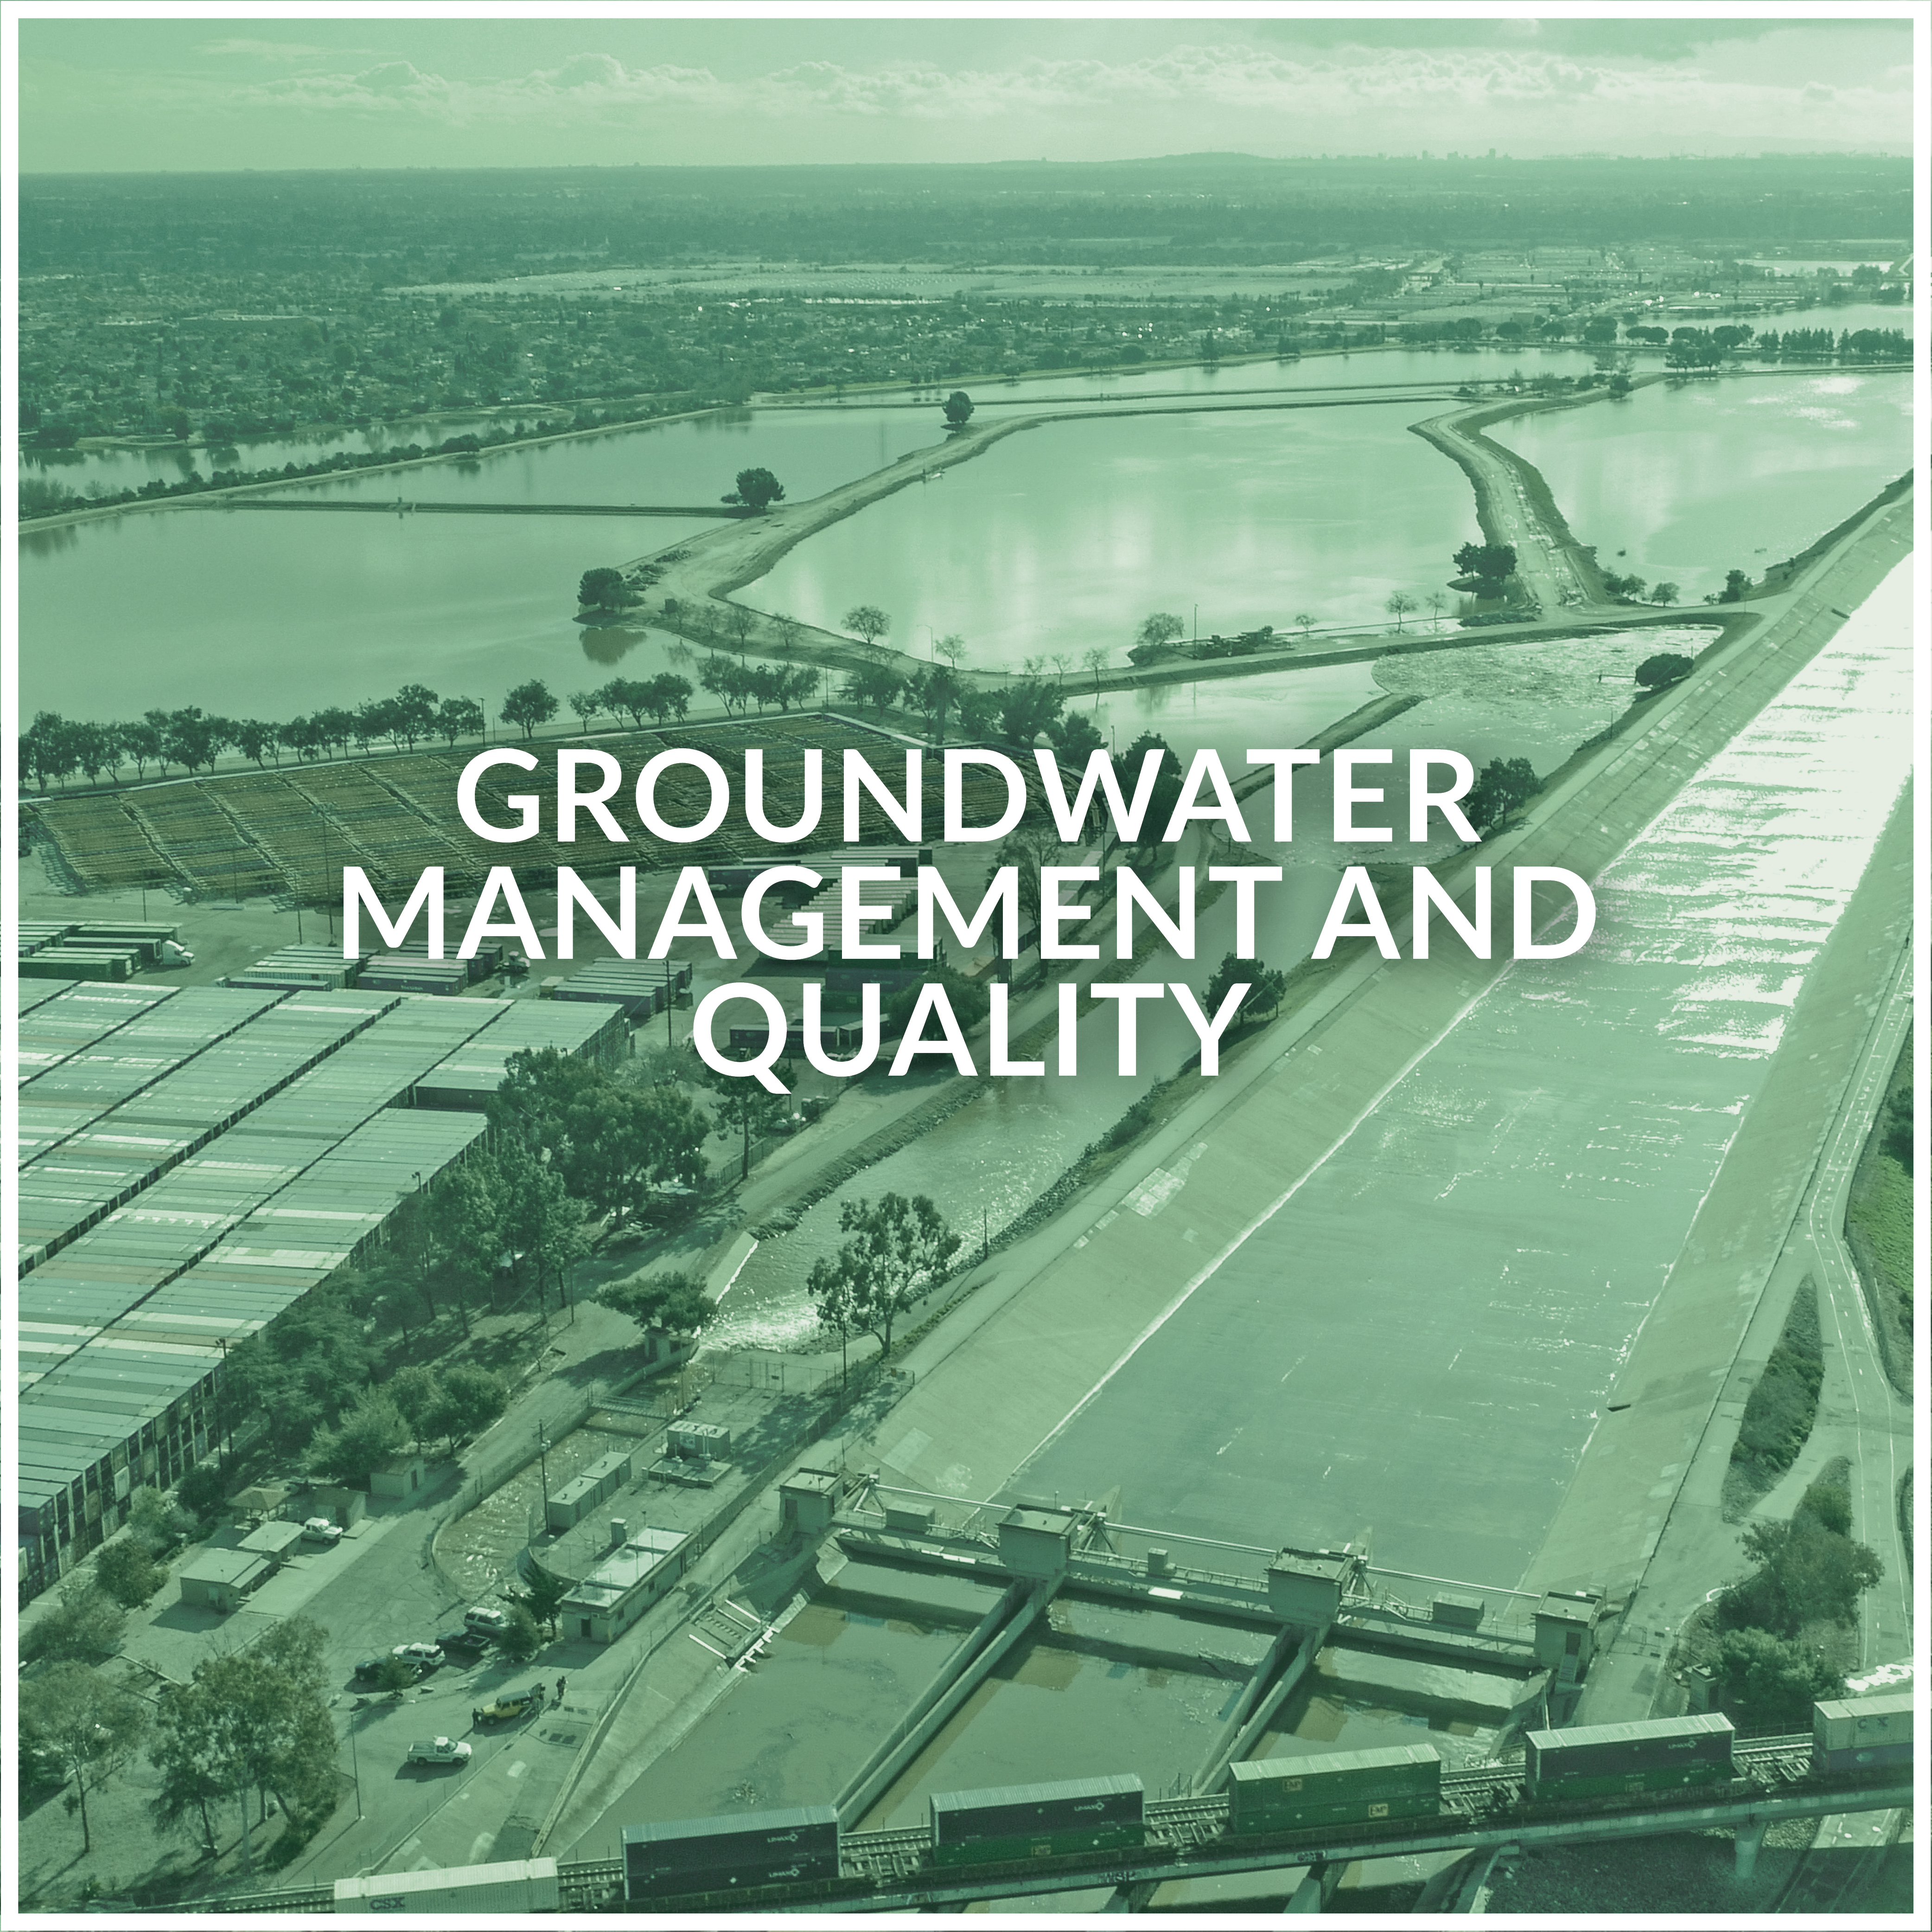 Groundwater management and quality button with a green hue and a picture of groundwater recharge basin that takes you to more information about the groundwater management and quality targets 